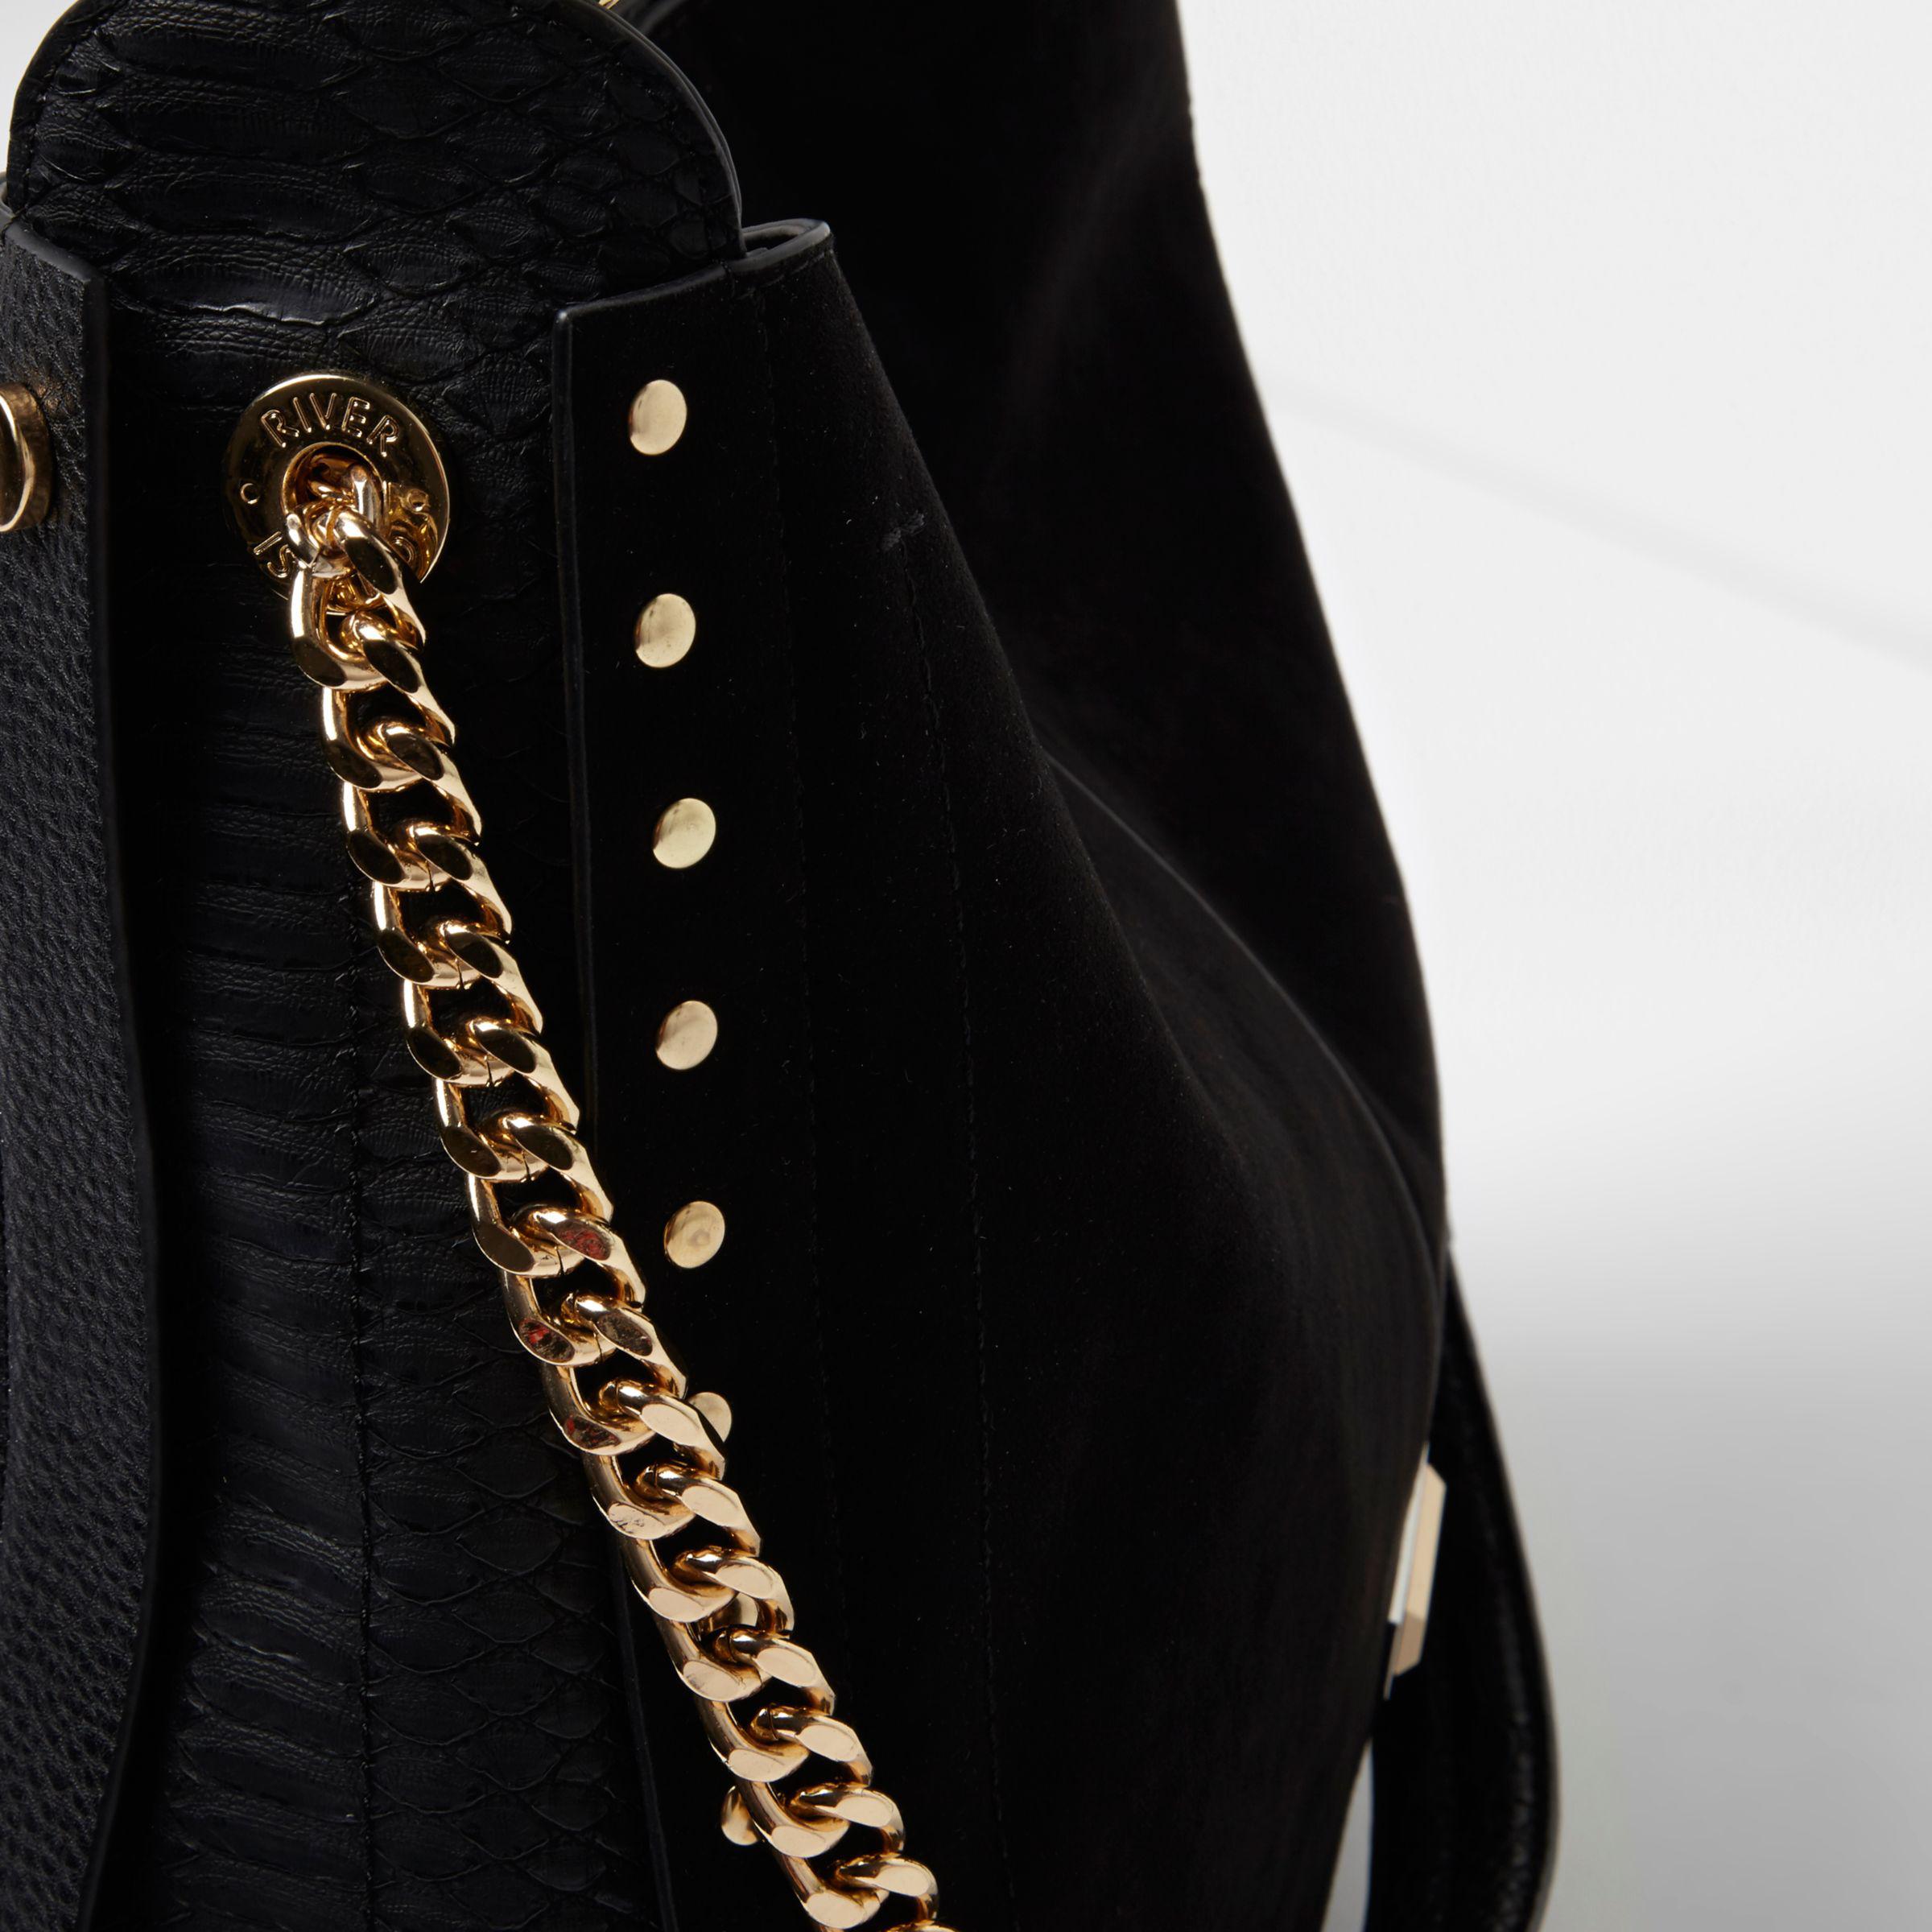 River Island Black Studded Oversized Slouch Chain Bag in Black - Lyst